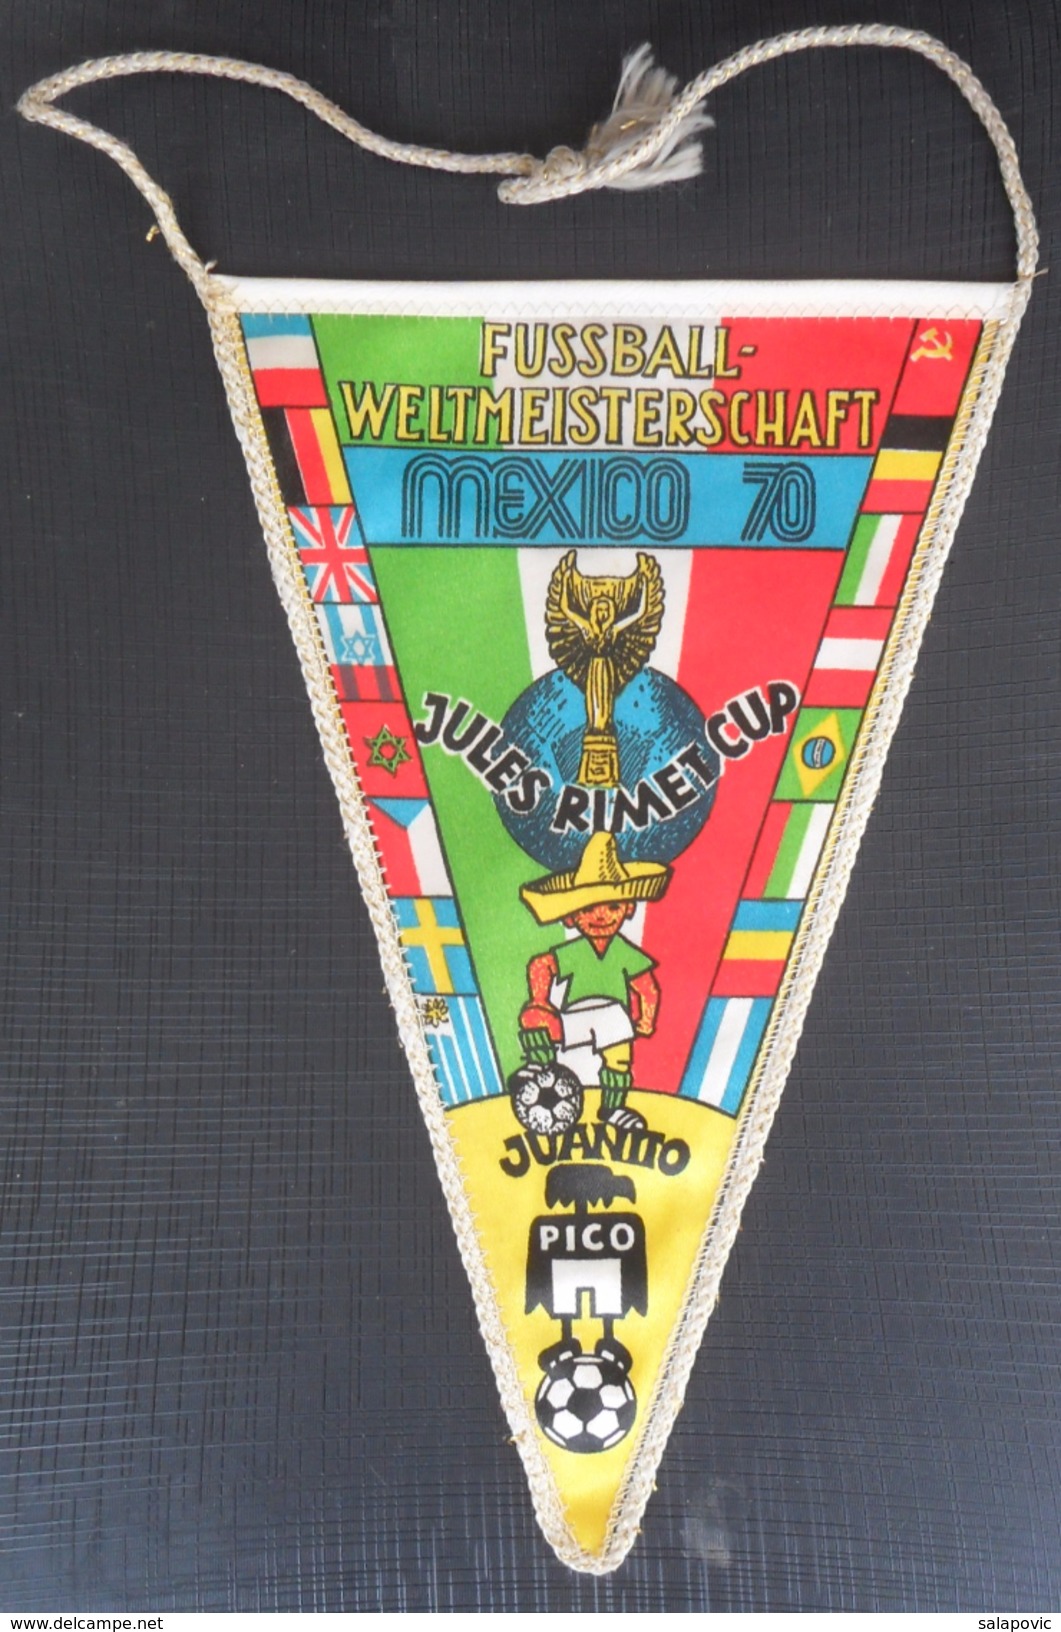 Fußball-Weltmeisterschaft 1970 Mexico,  FIFA World Cup  FOOTBALL CLUB SOCCER / FUTBOL / CALCIO, OLD PENNANT, SPORTS FLAG - Apparel, Souvenirs & Other